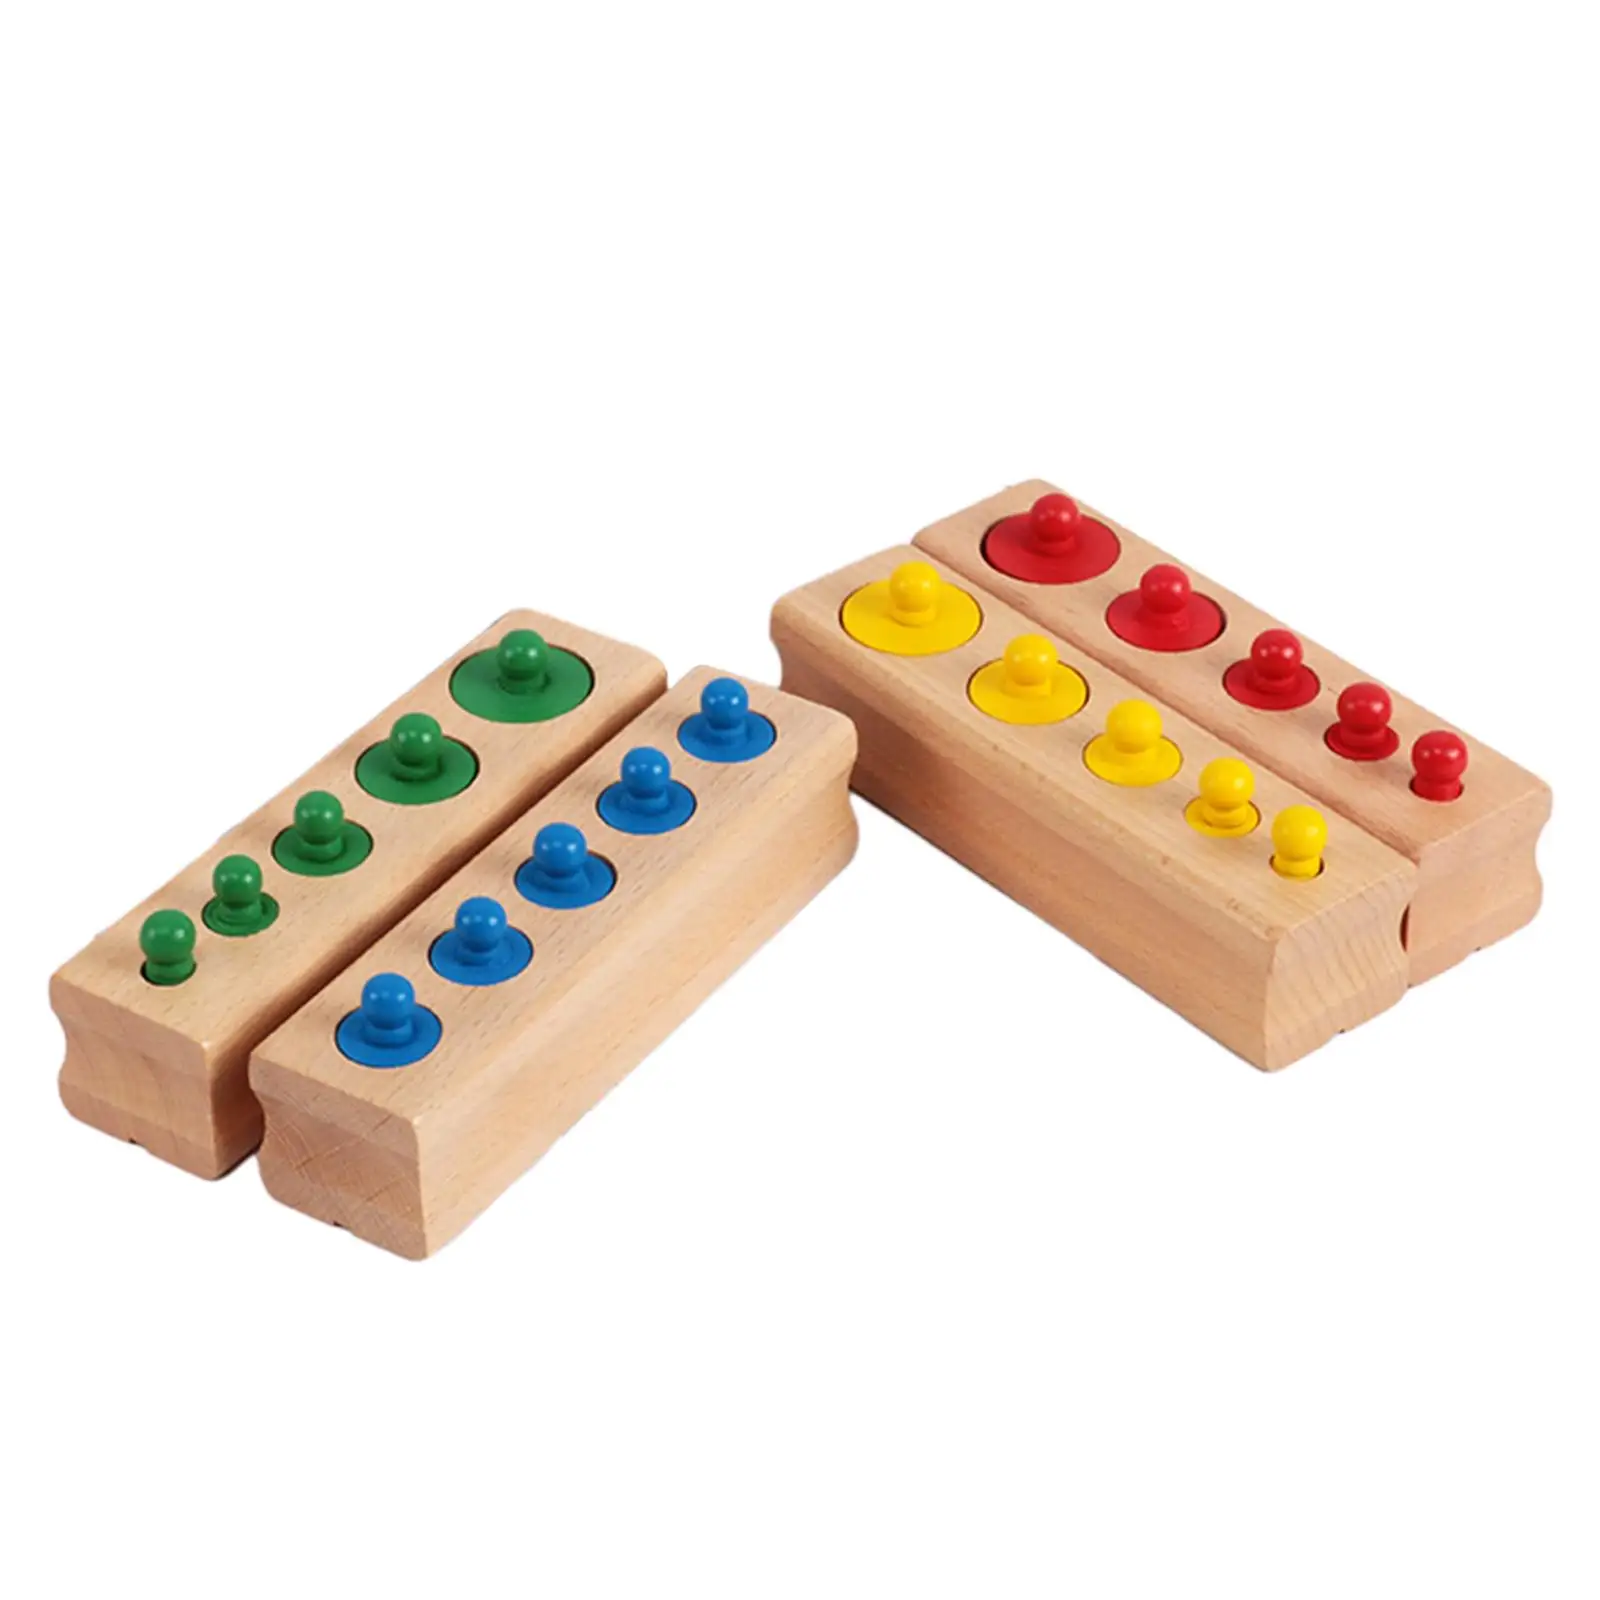 4 Pieces Knobbed Cylinders Blocks Socket Montessori Toy Wooden Cylinders Ladder Blocks for School Home Preschool Toys Toddlers